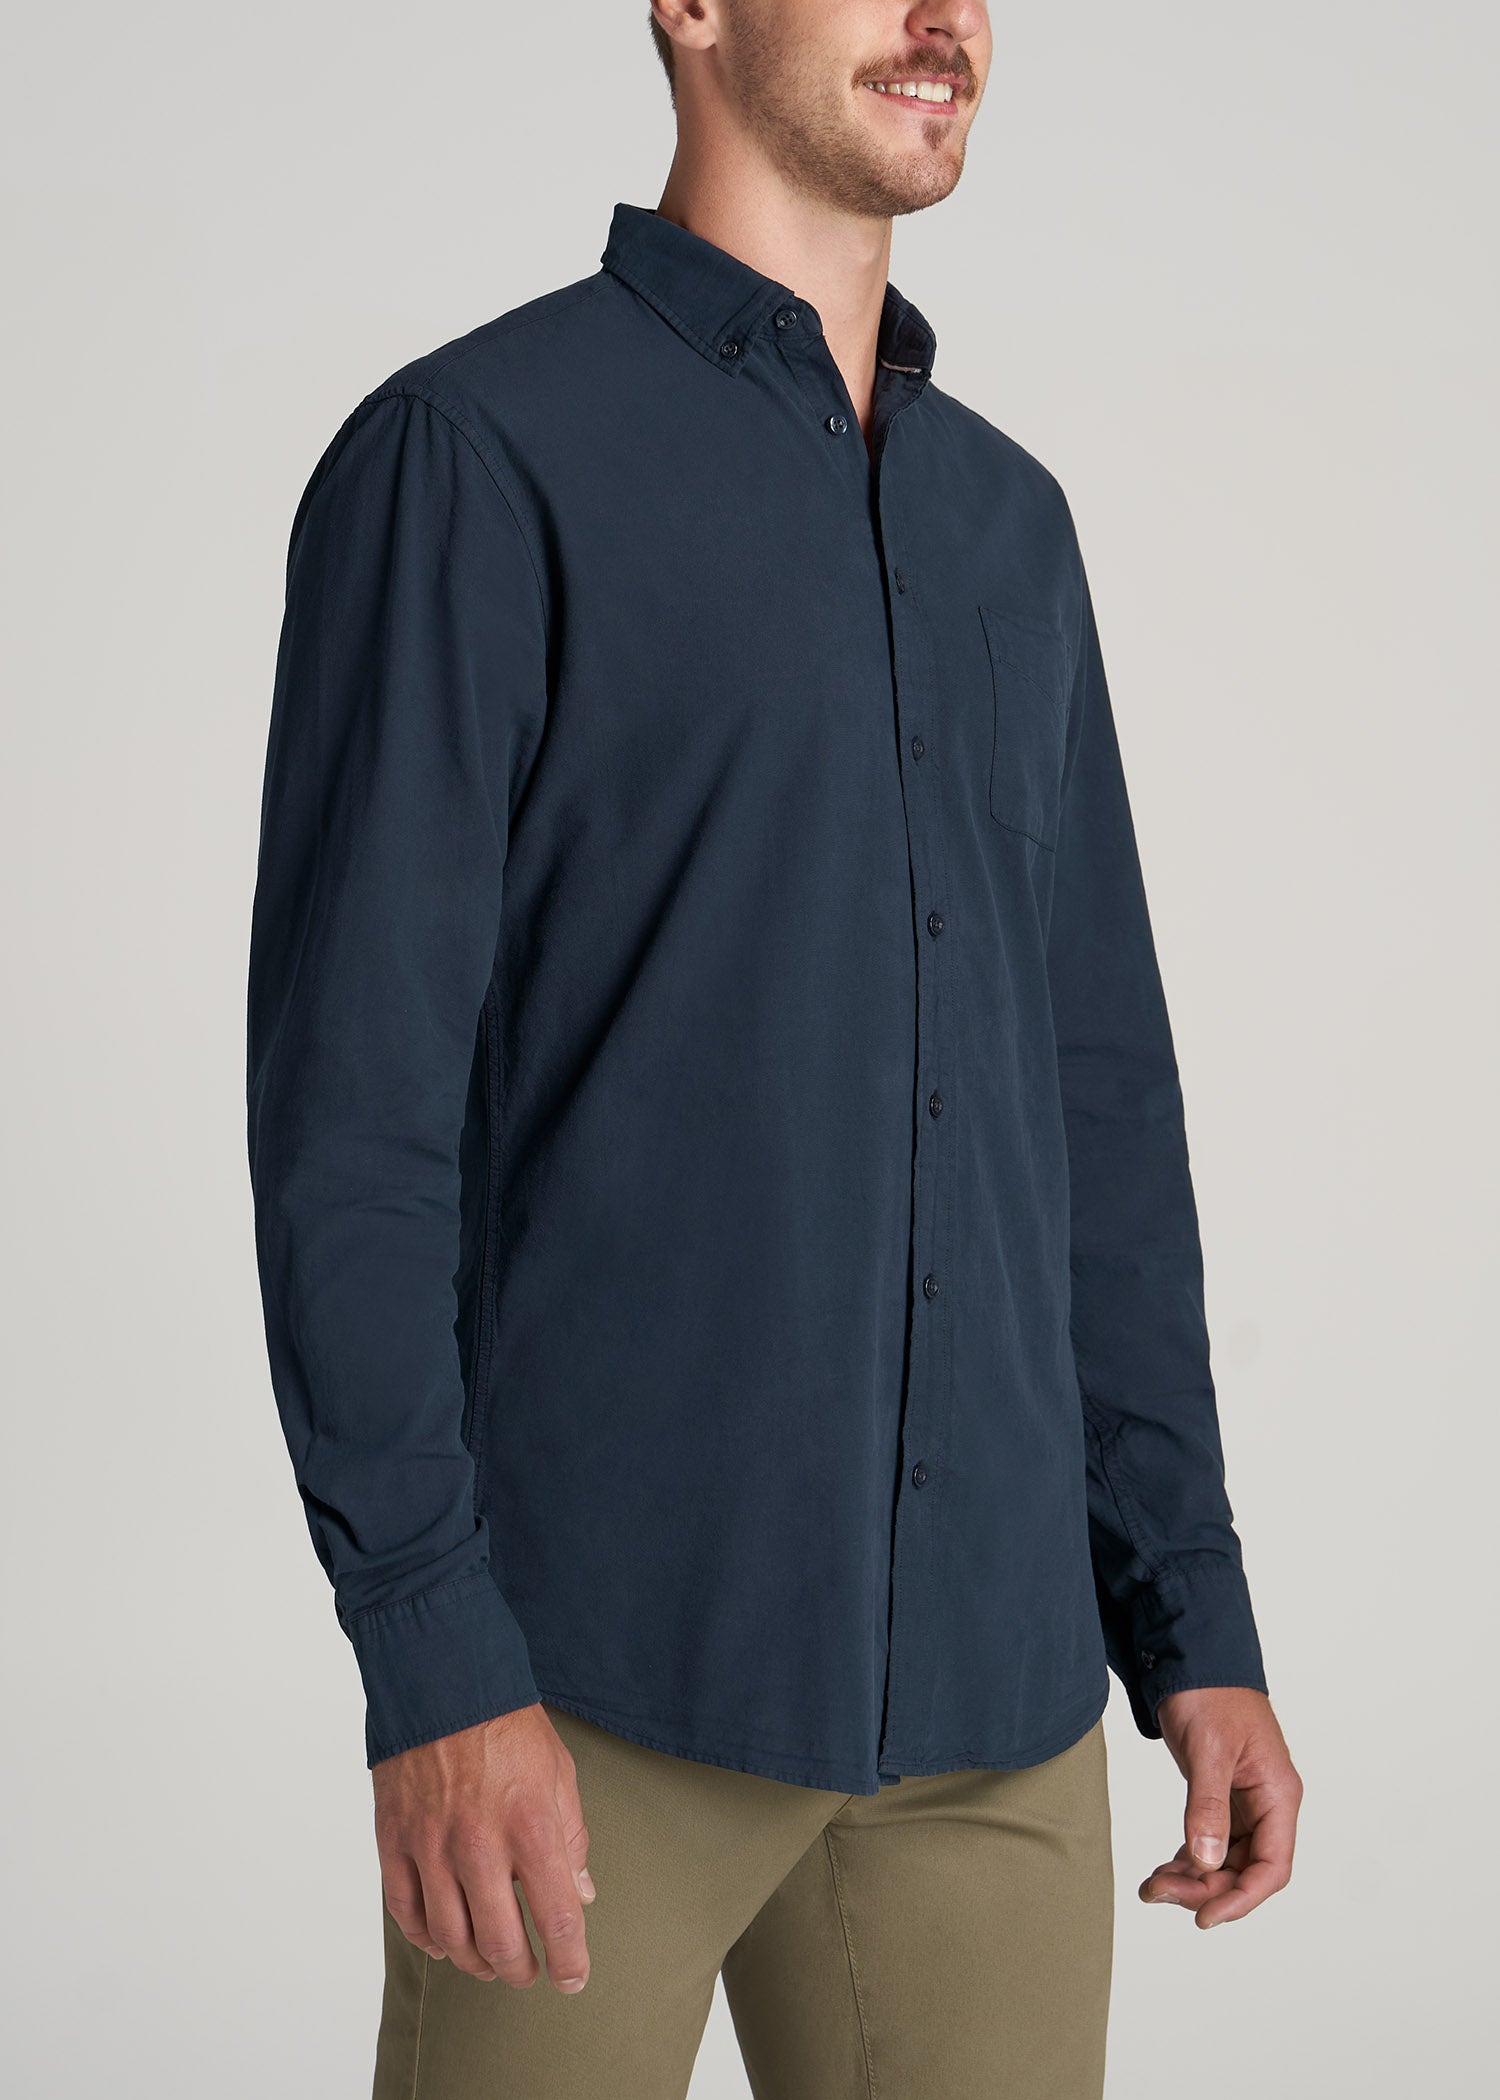 Washed Oxford Shirt for Tall Men in Navy